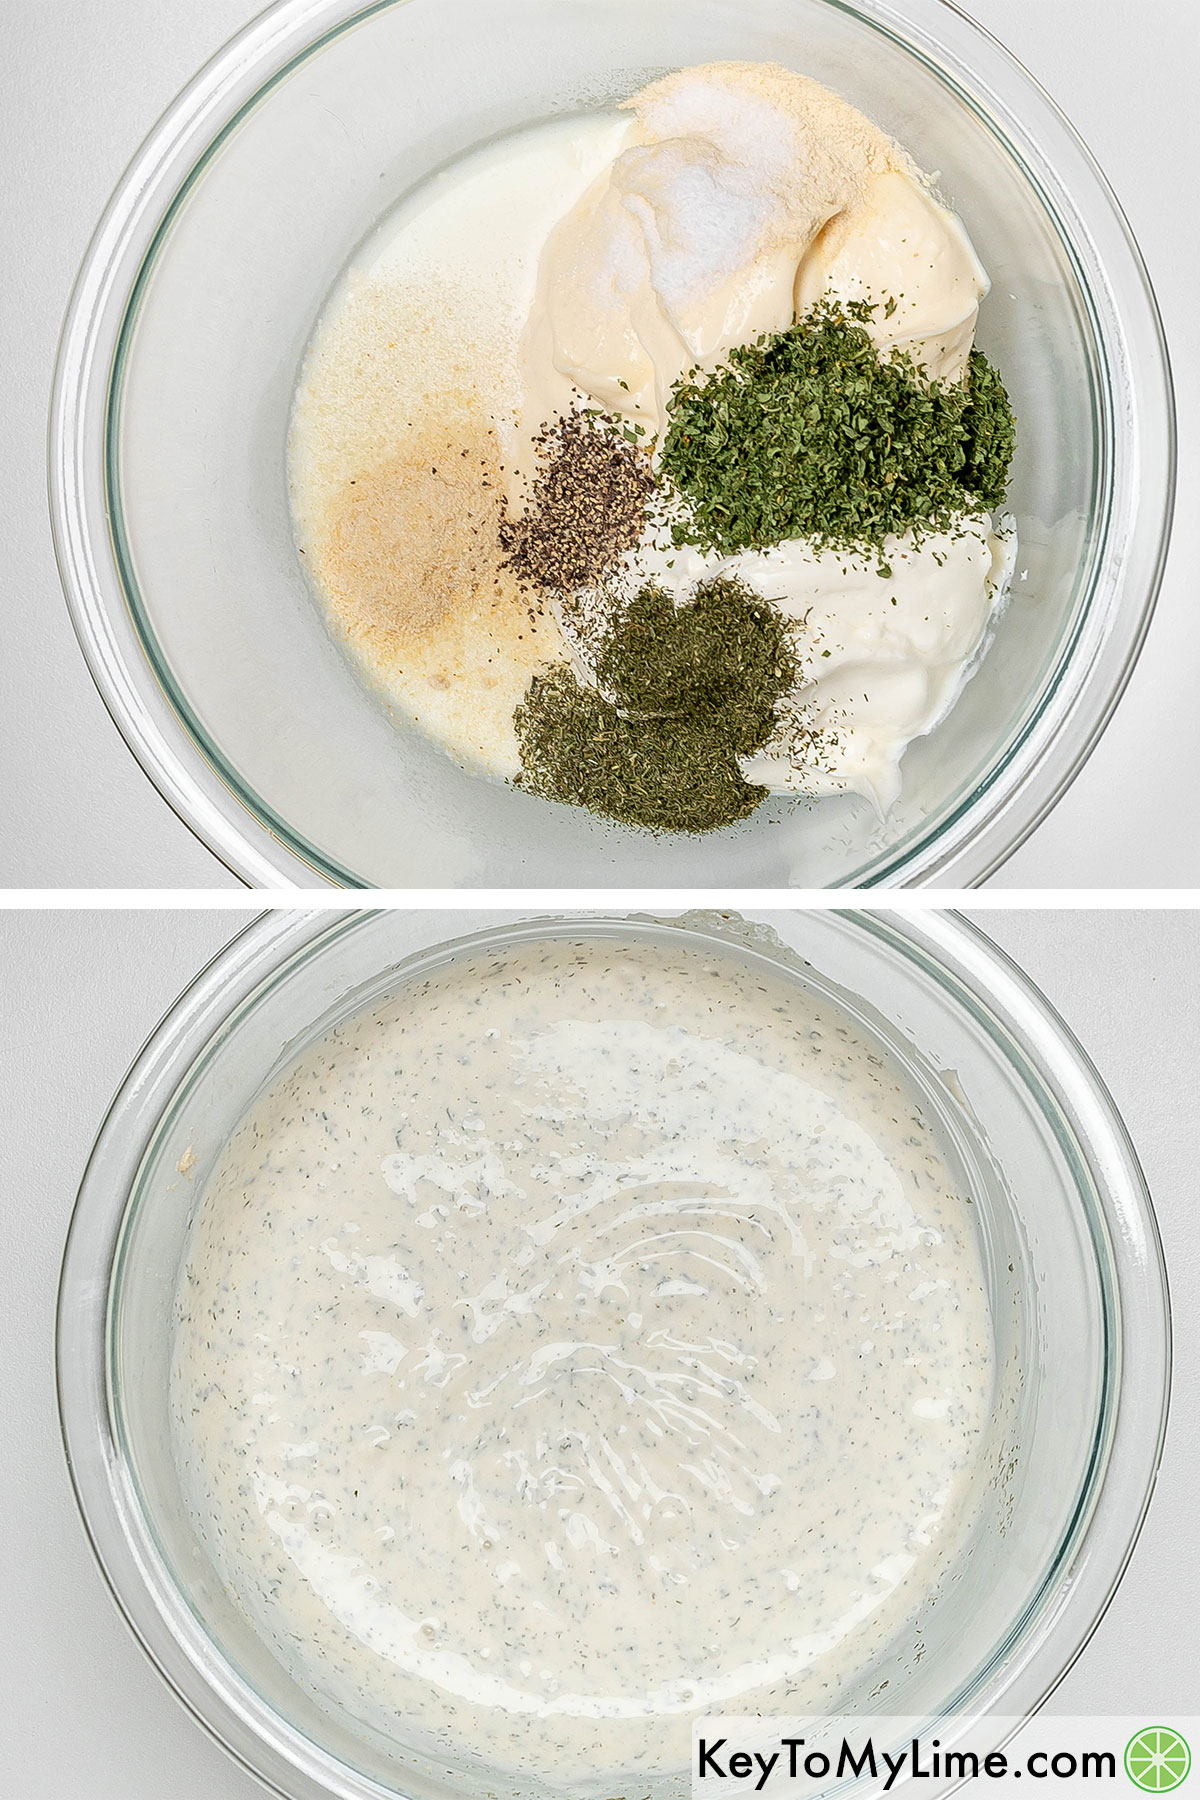 Adding the mayonnaise, sour cream, and dry seasonings in a large mixing bowl and thoroughly mixing together.